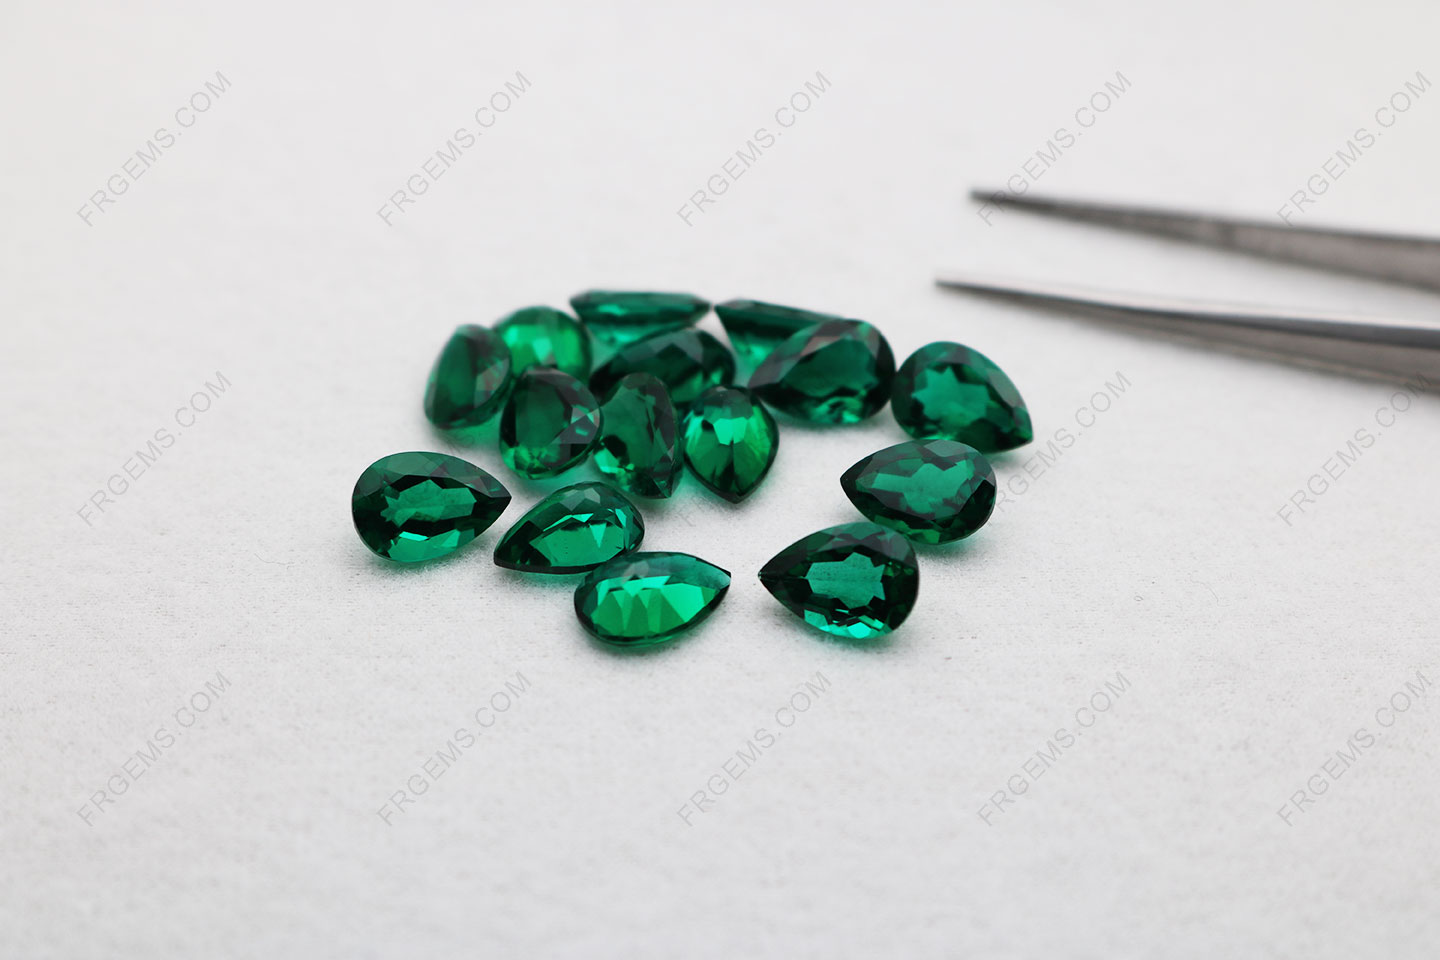 Loose Lab Grown Emerald Zambia Green Pear shape 10x7mm faceted gemstones IMG_5066